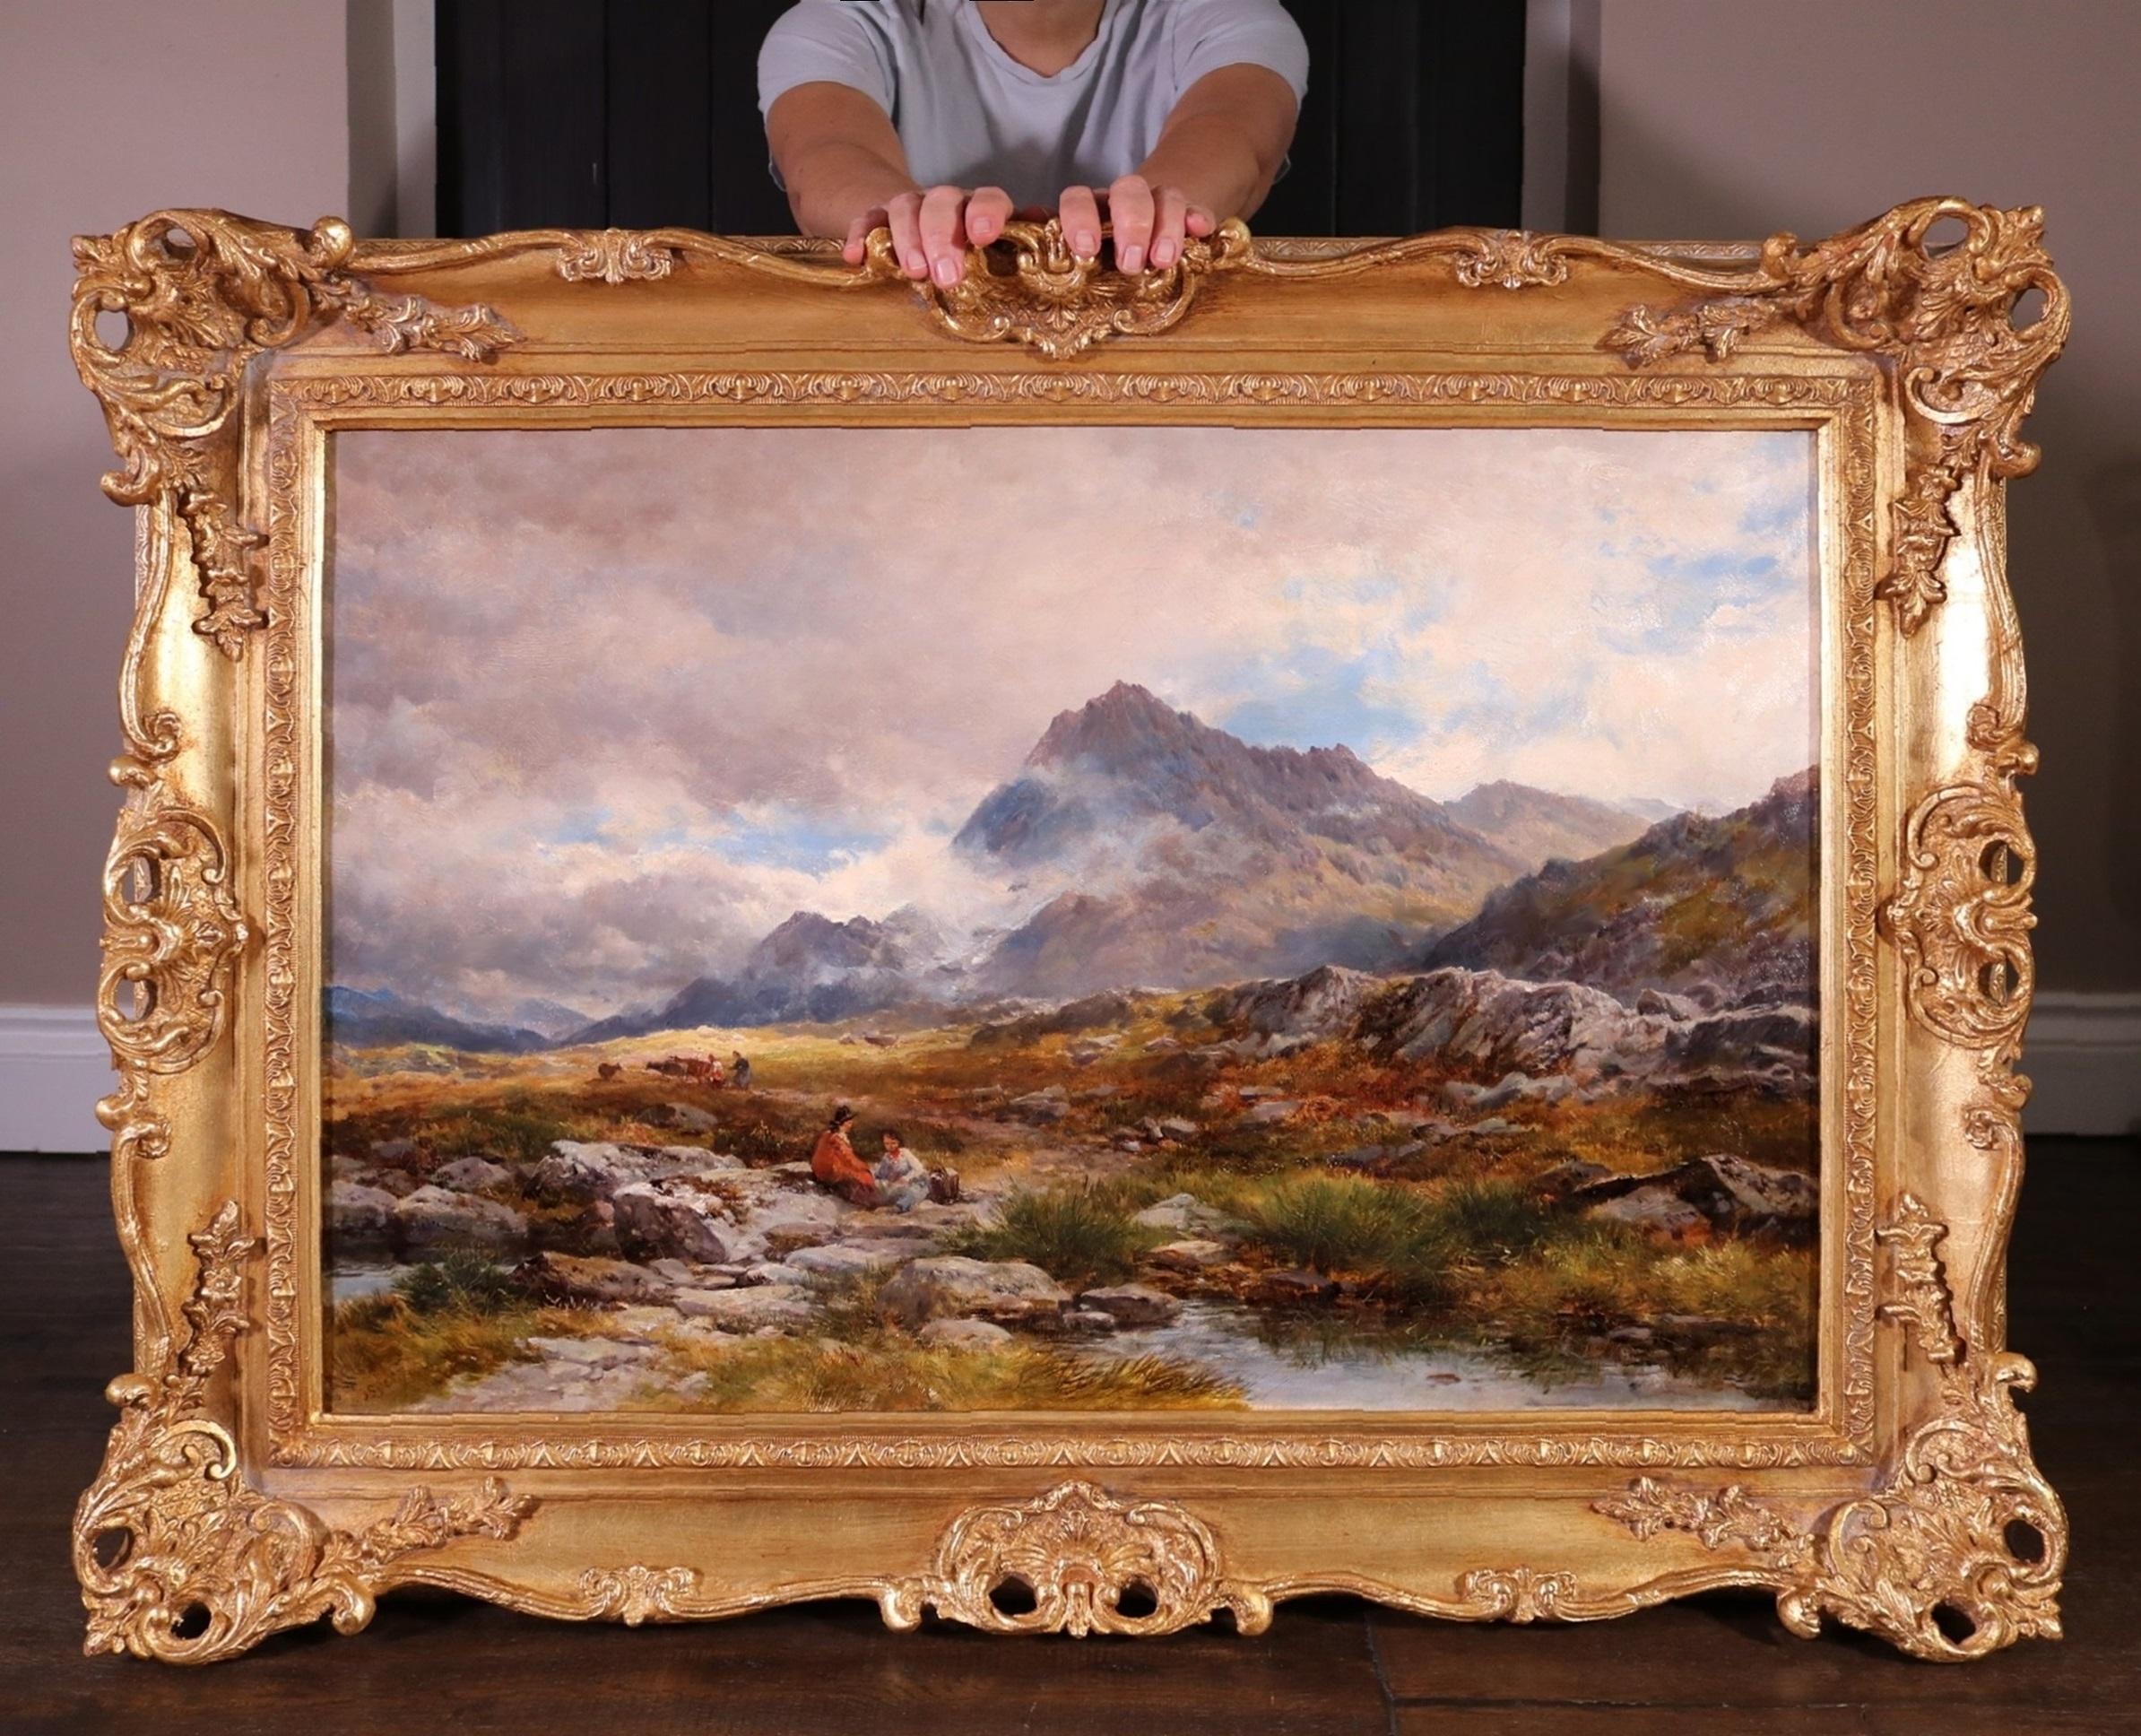 John Syer Landscape Painting - Glyder Fawr - Large 19th Century Oil Painting Dramatic Welsh Mountain Landscape 